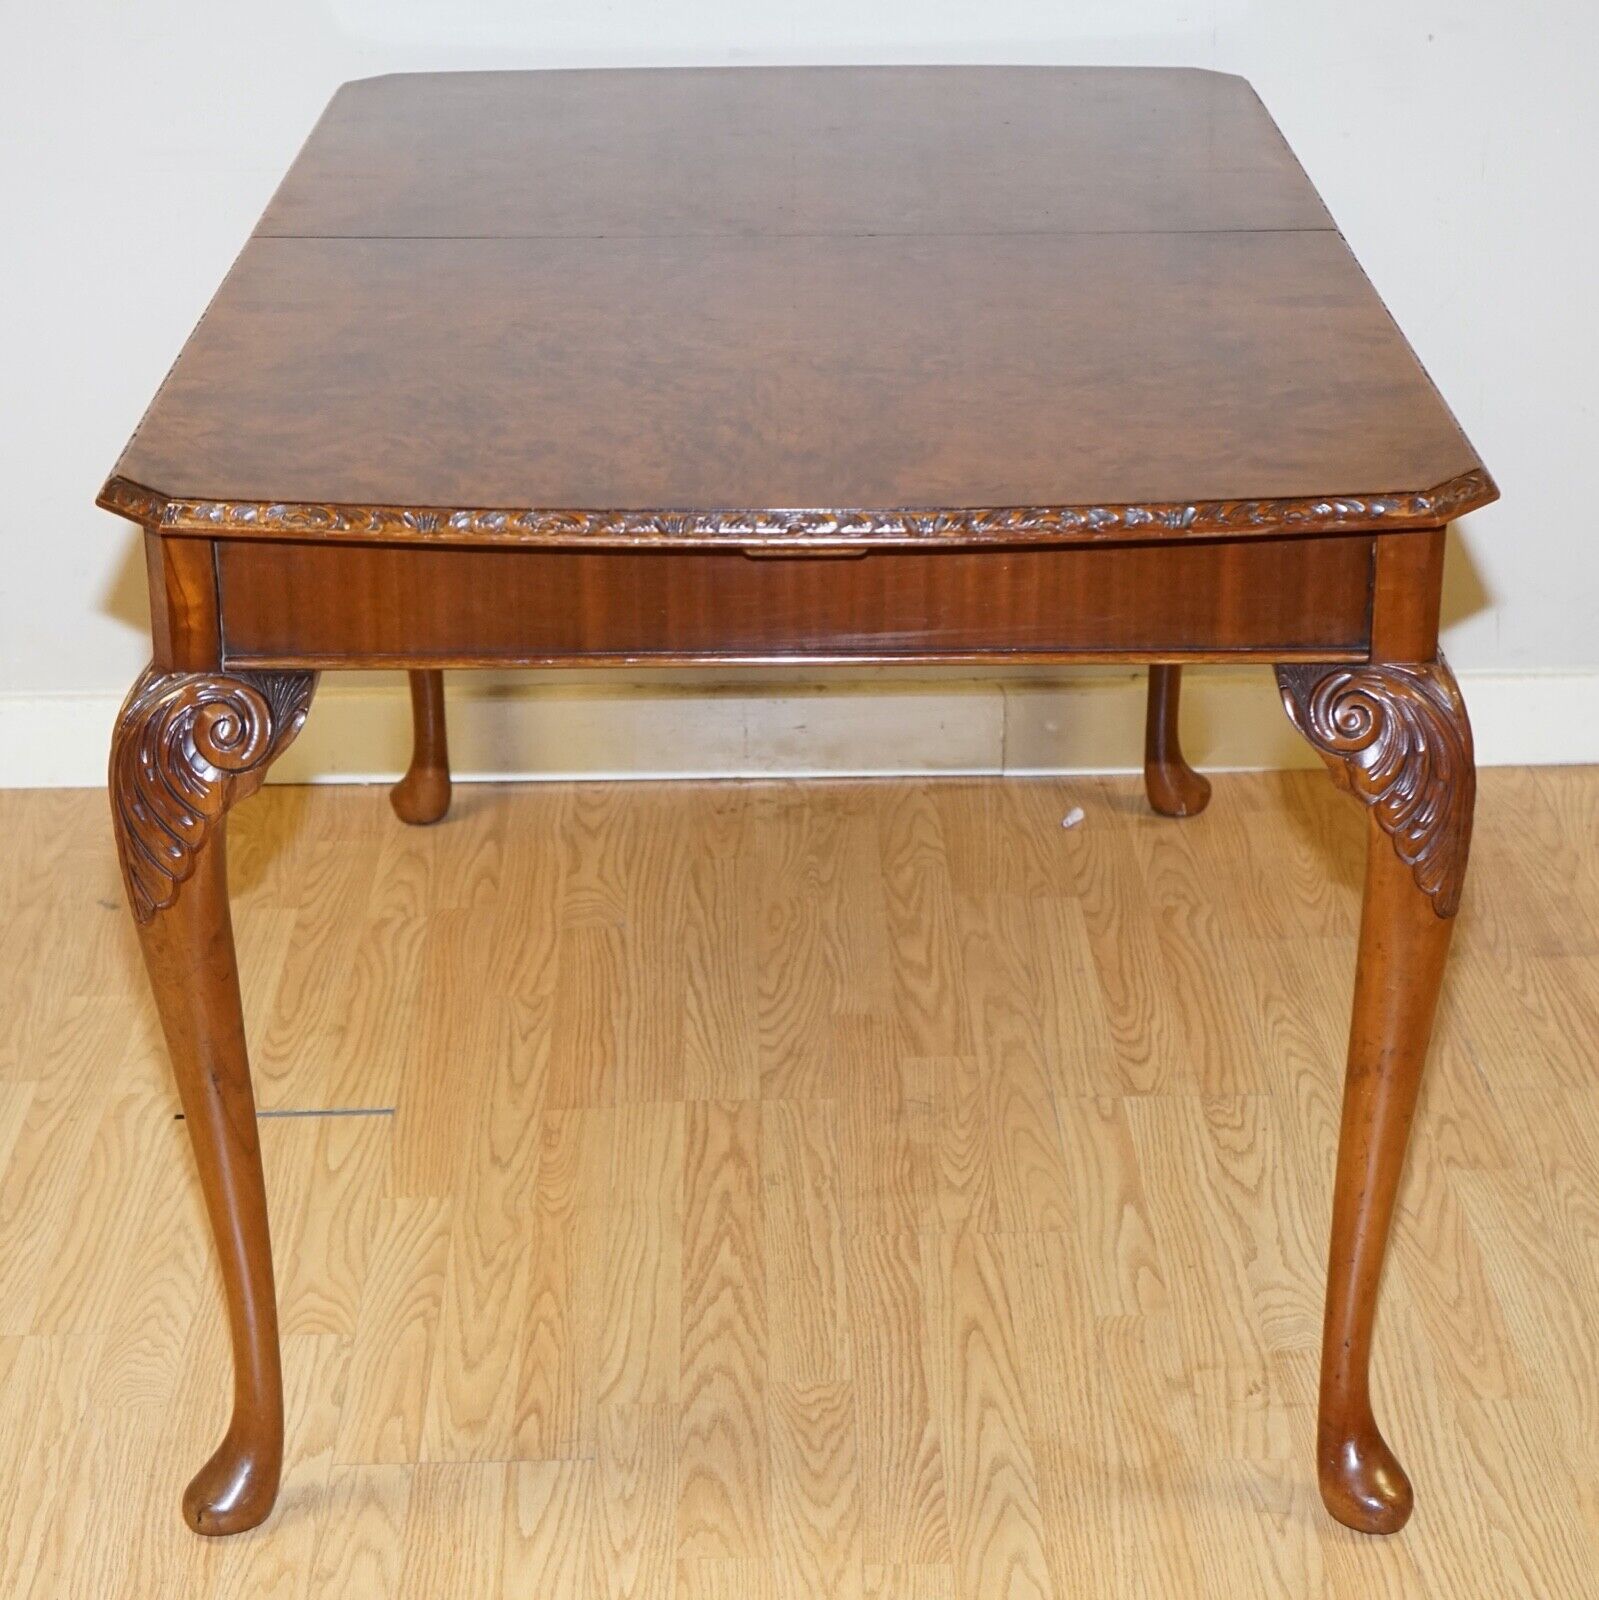 A VERY BEAUTIFUL CIRCA 1930's BURR WALNUT QUEEN ANNE CARVED LEGS DINING TABLE